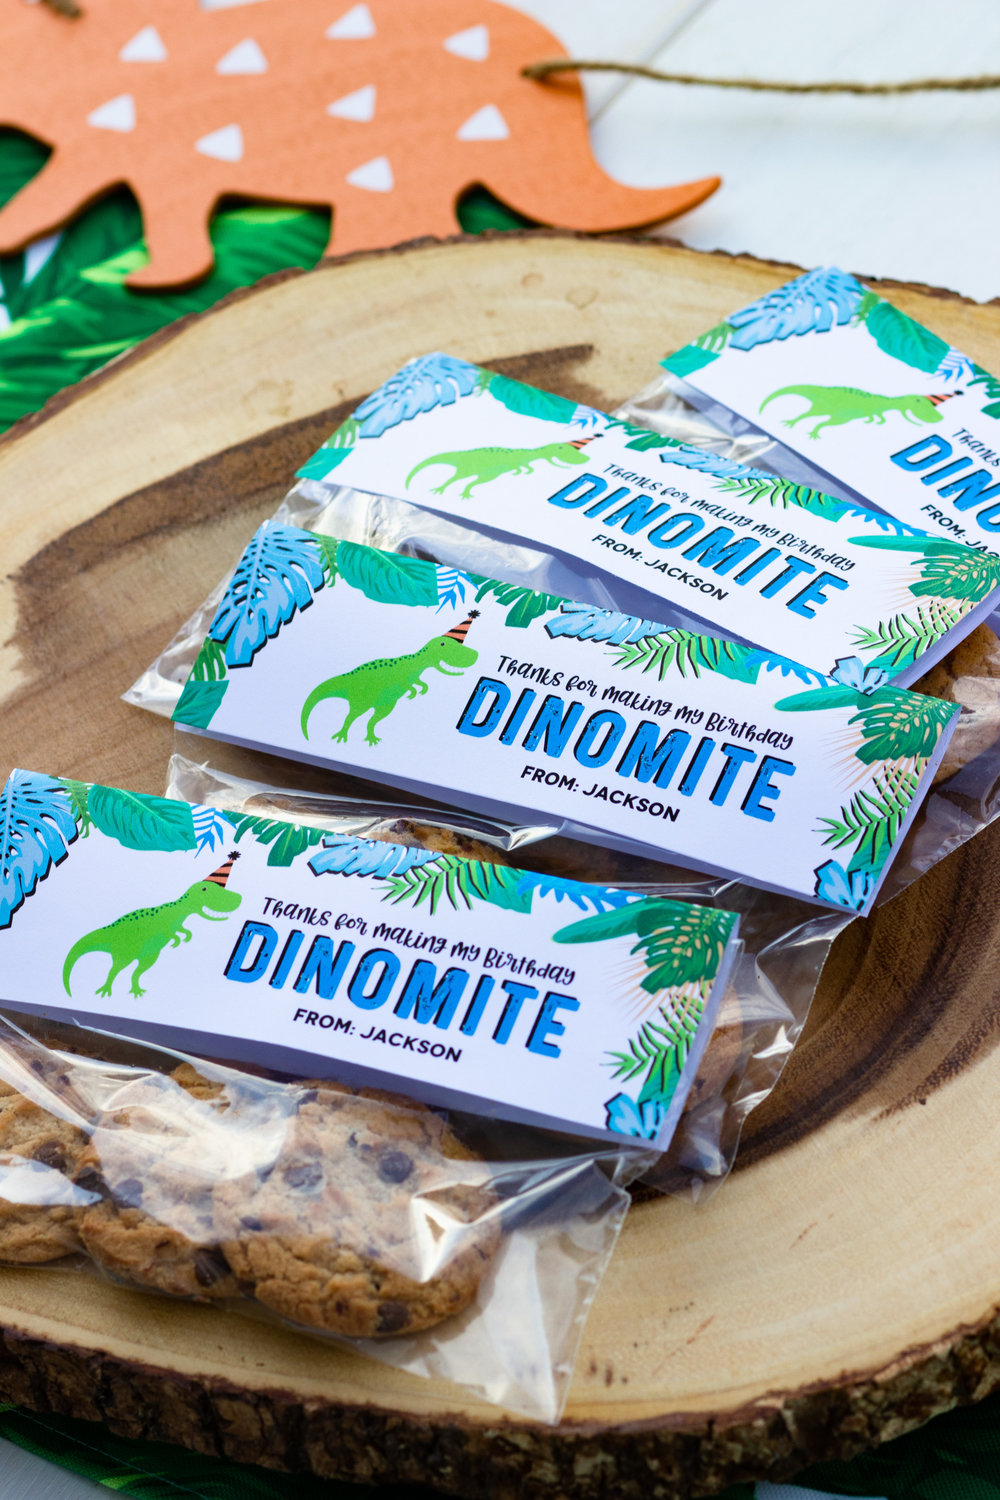 Thanks for making my party dinomite - Bag Toppers for school treats or party favors // Get the freebie from mkkmdesigns.com